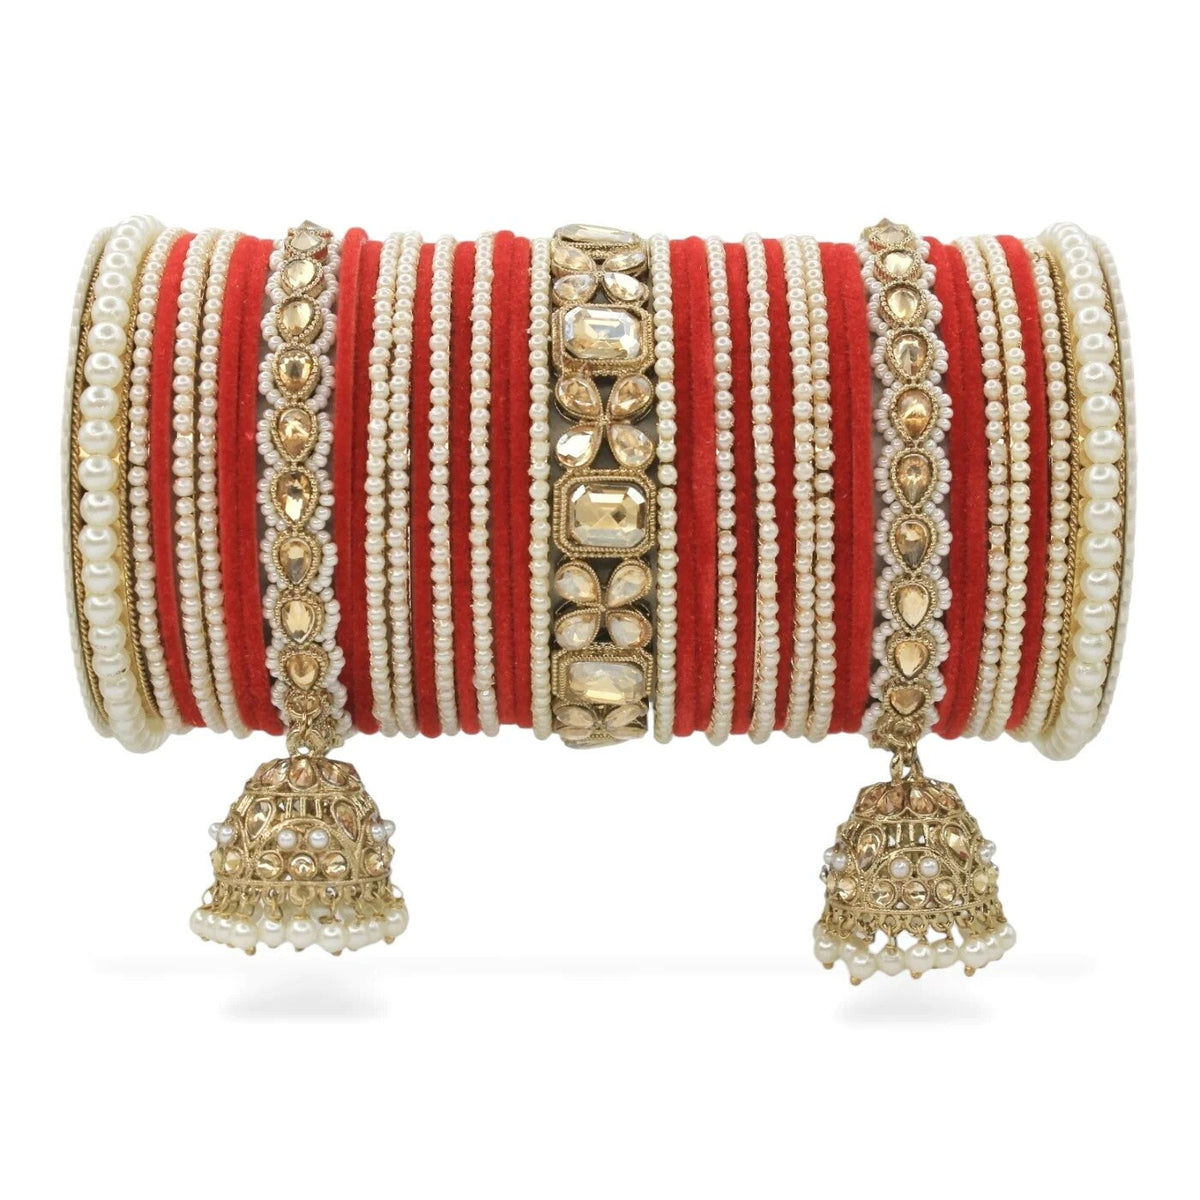 Indian Bangles in Different Colors Pearl Bangles Set with Jhumki Borders, Indian wedding Tassel Bangles Set Woman Jewelry Set